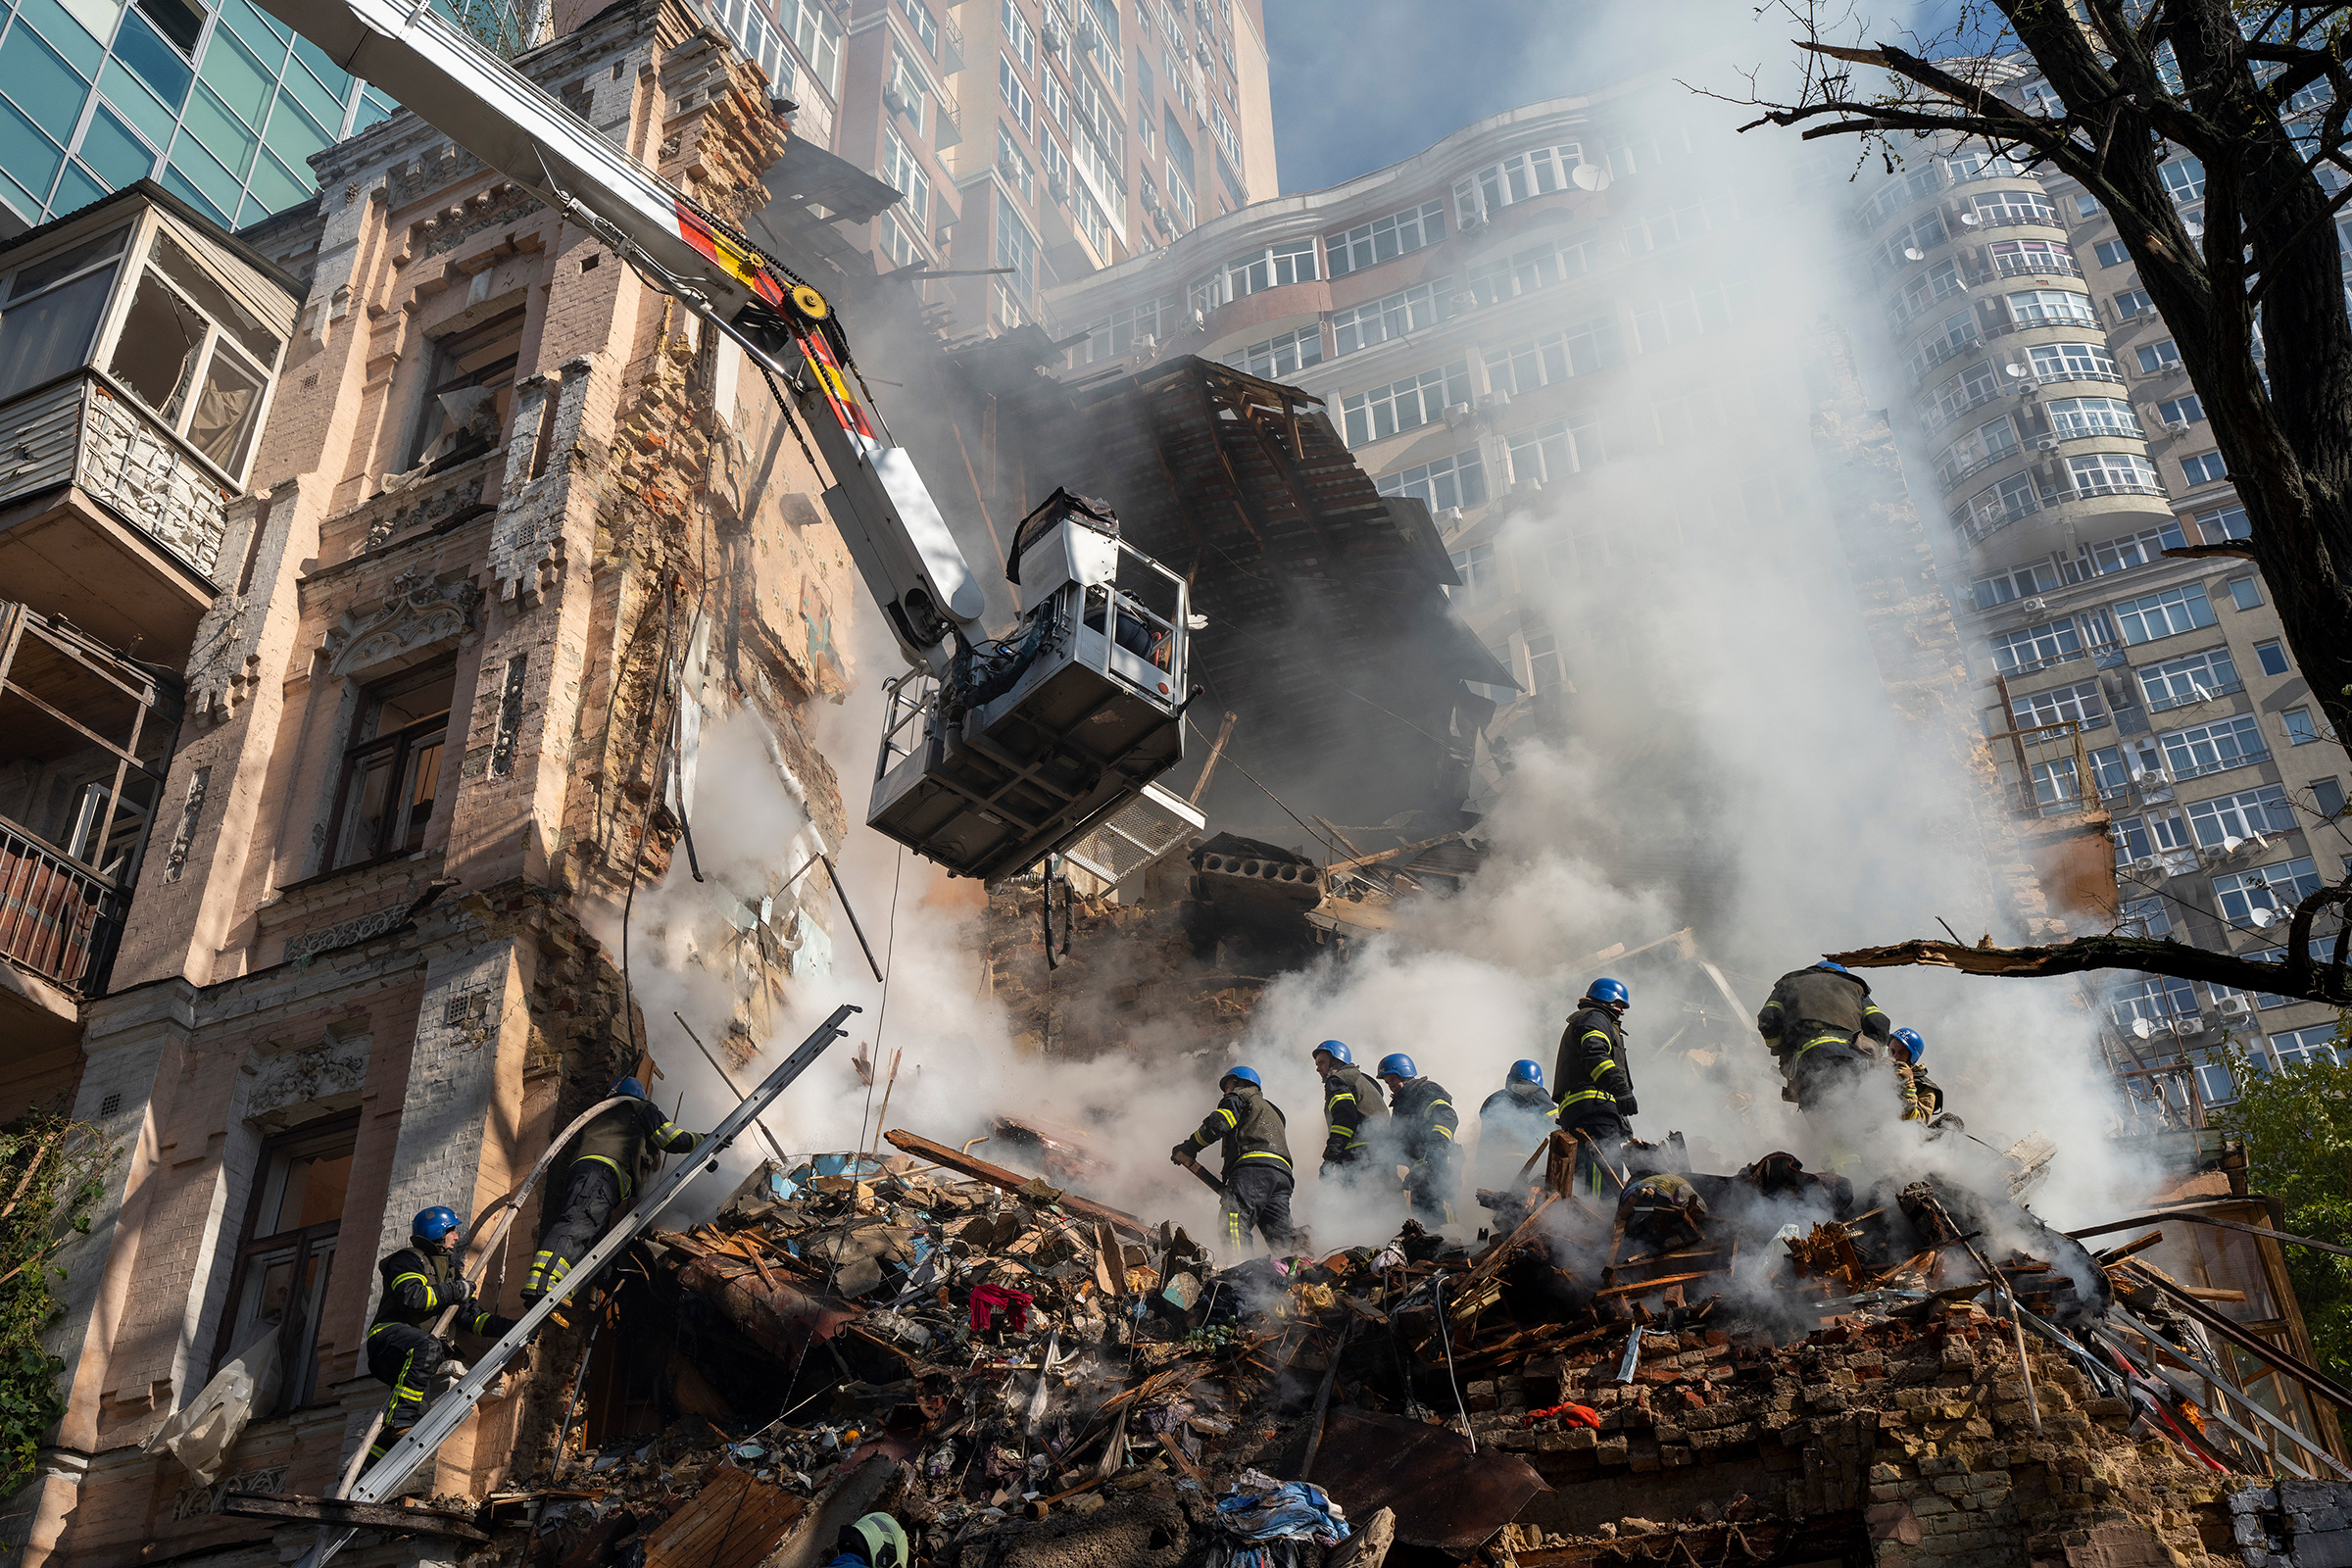 Firefighters work after a drone attack on buildings in Kyiv, Ukraine on Oct. 17. Waves of explosive-laden suicide drones struck Ukraine's capital as families were preparing to start their week early Monday, the blasts echoing across Kyiv, setting buildings ablaze and sending people scurrying to shelters. (Roman Hrytsyna—AP)